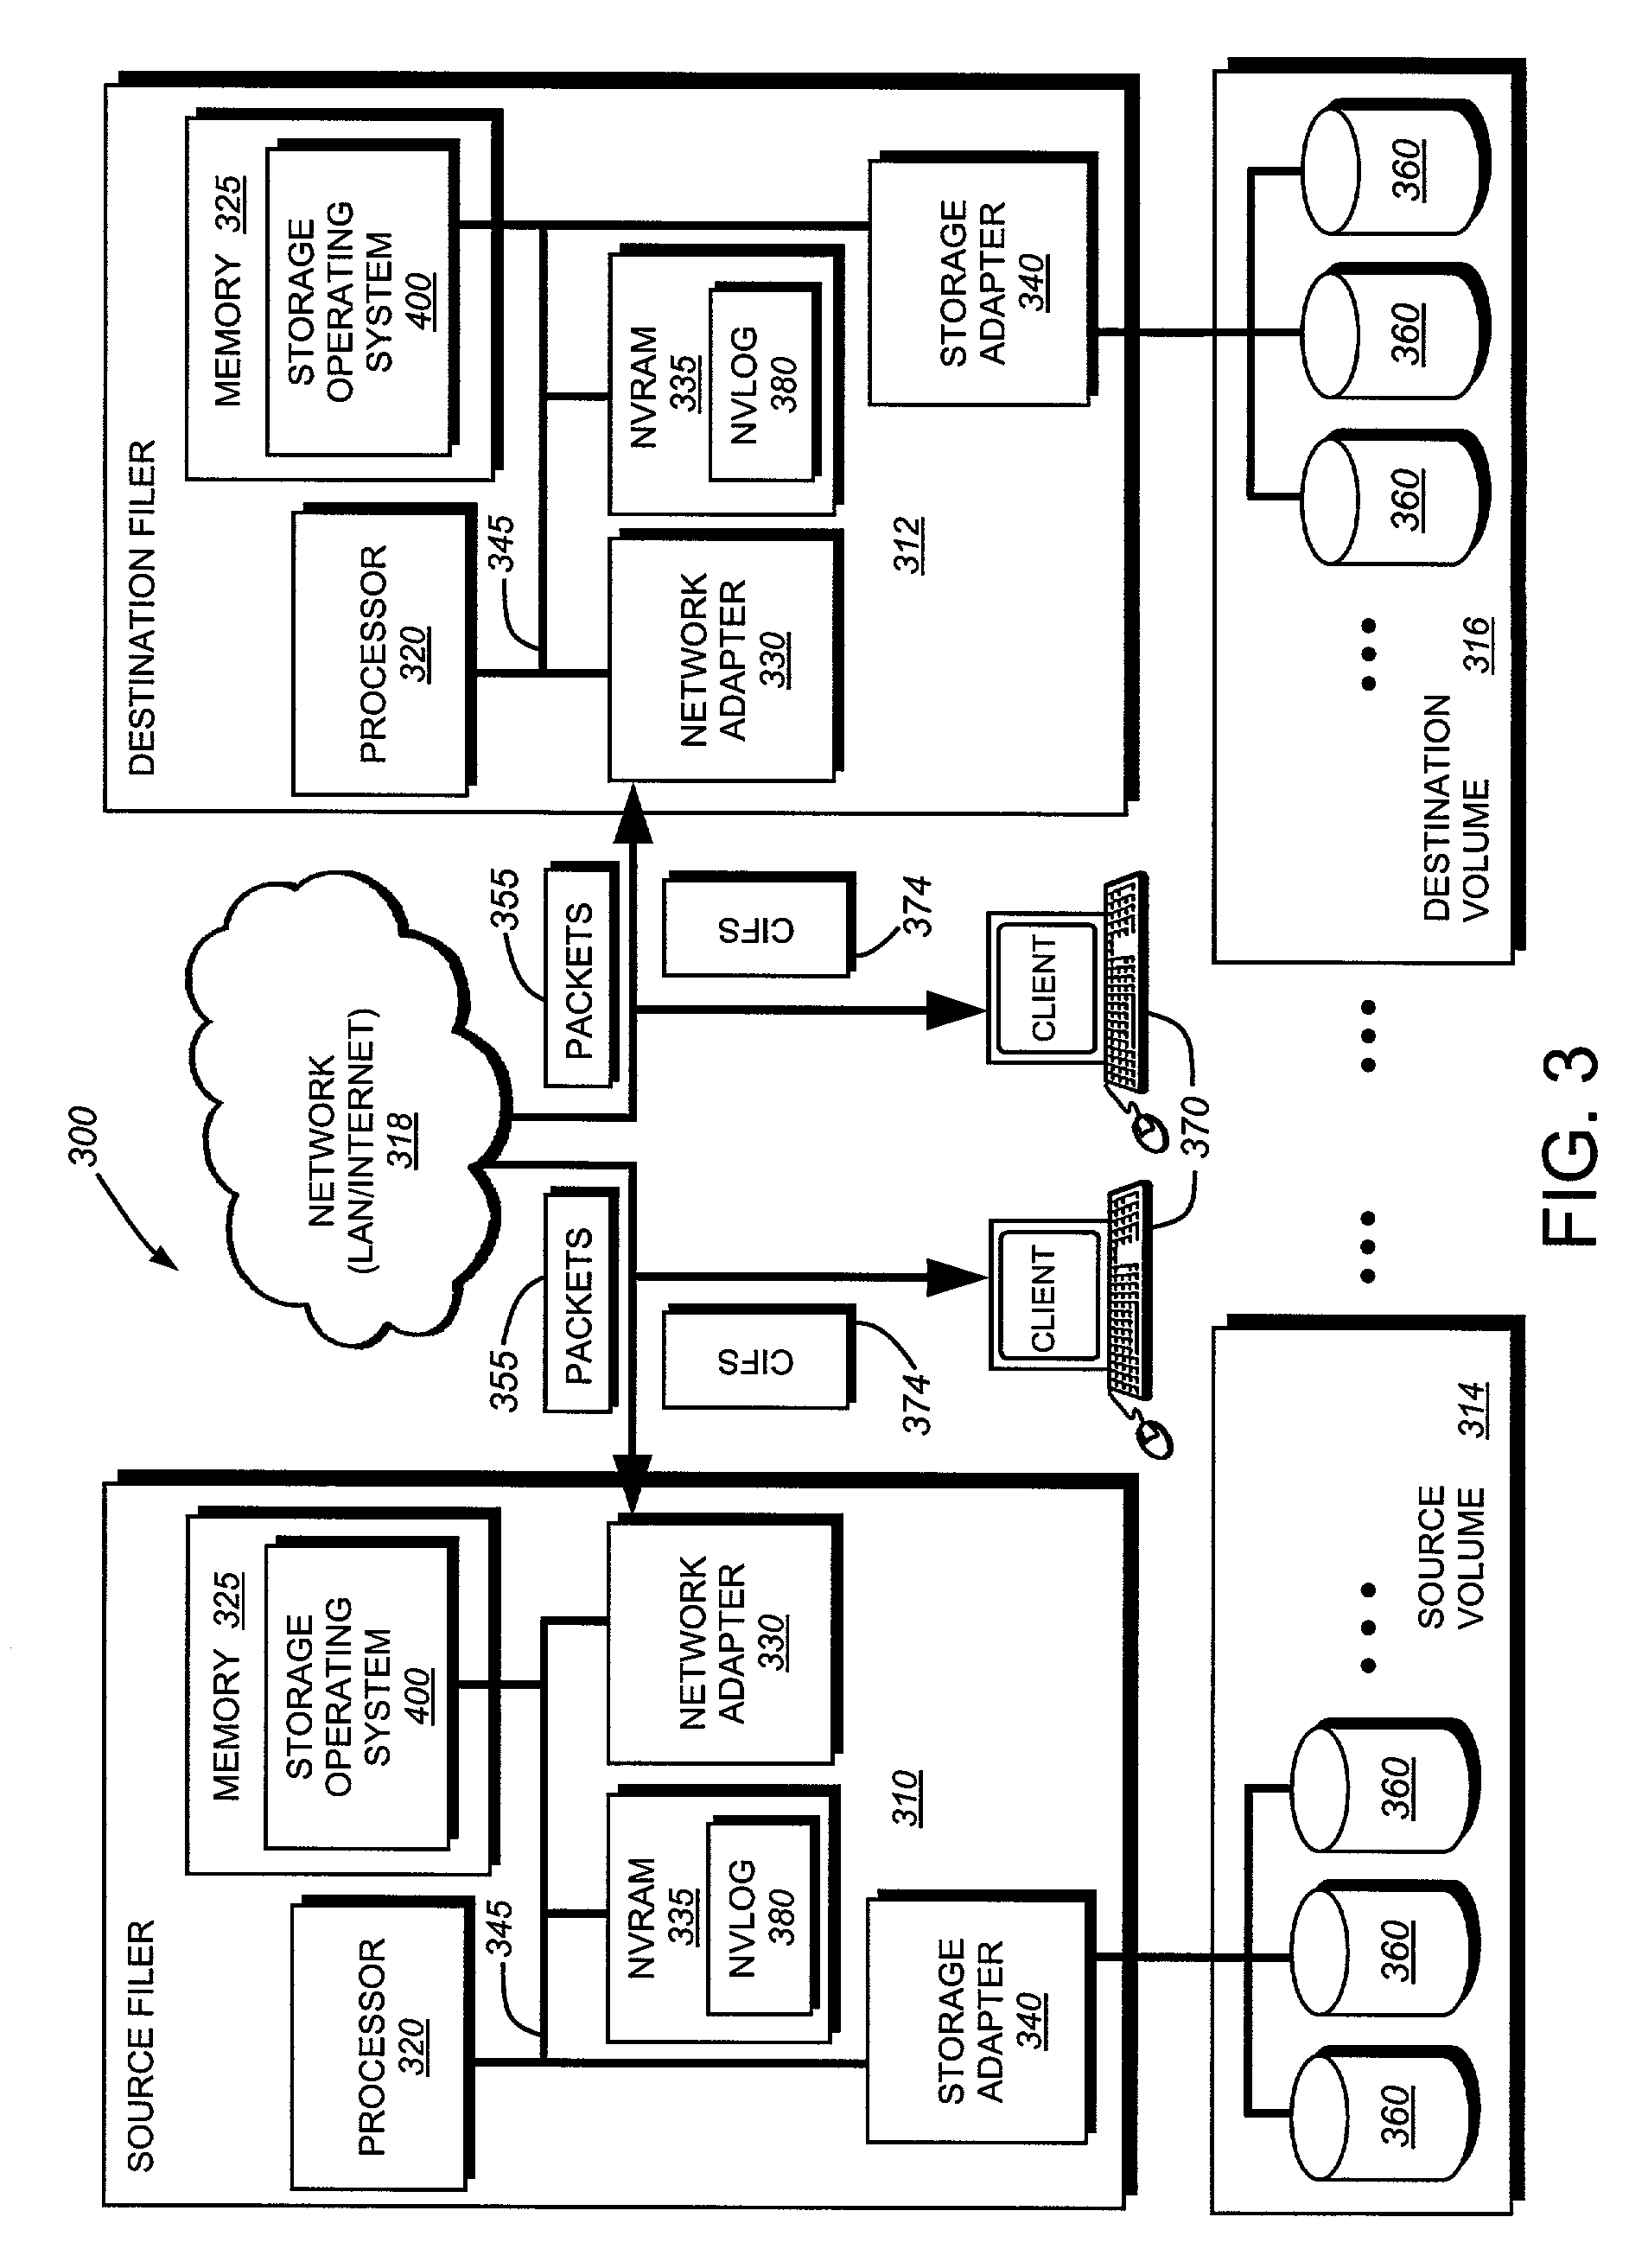 Format for transmission file system information between a source and a destination